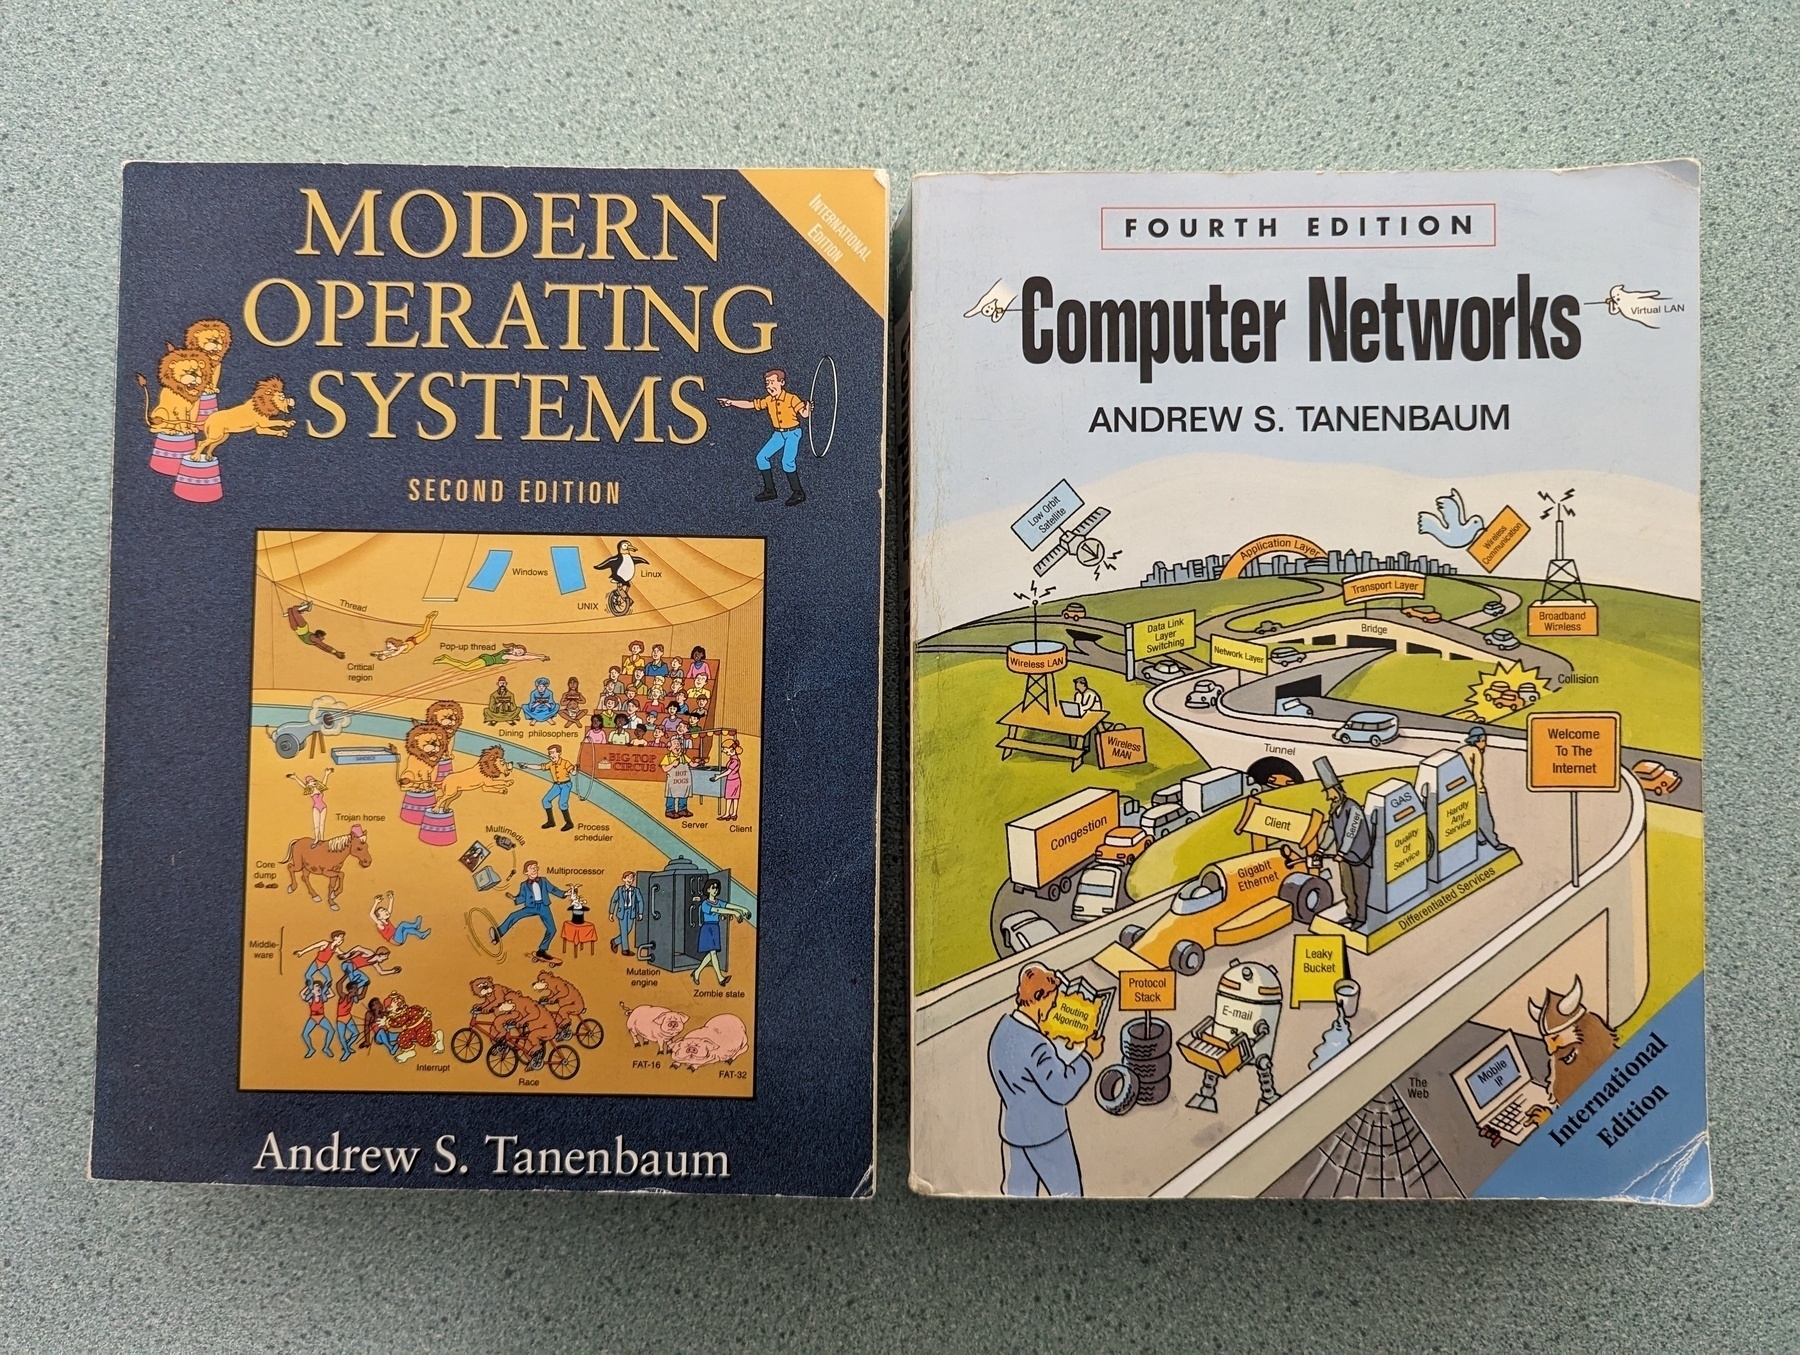 Auto-generated description: Two textbooks titled Modern Operating Systems and Computer Networks by Andrew S. Tanenbaum are placed side by side on a surface.